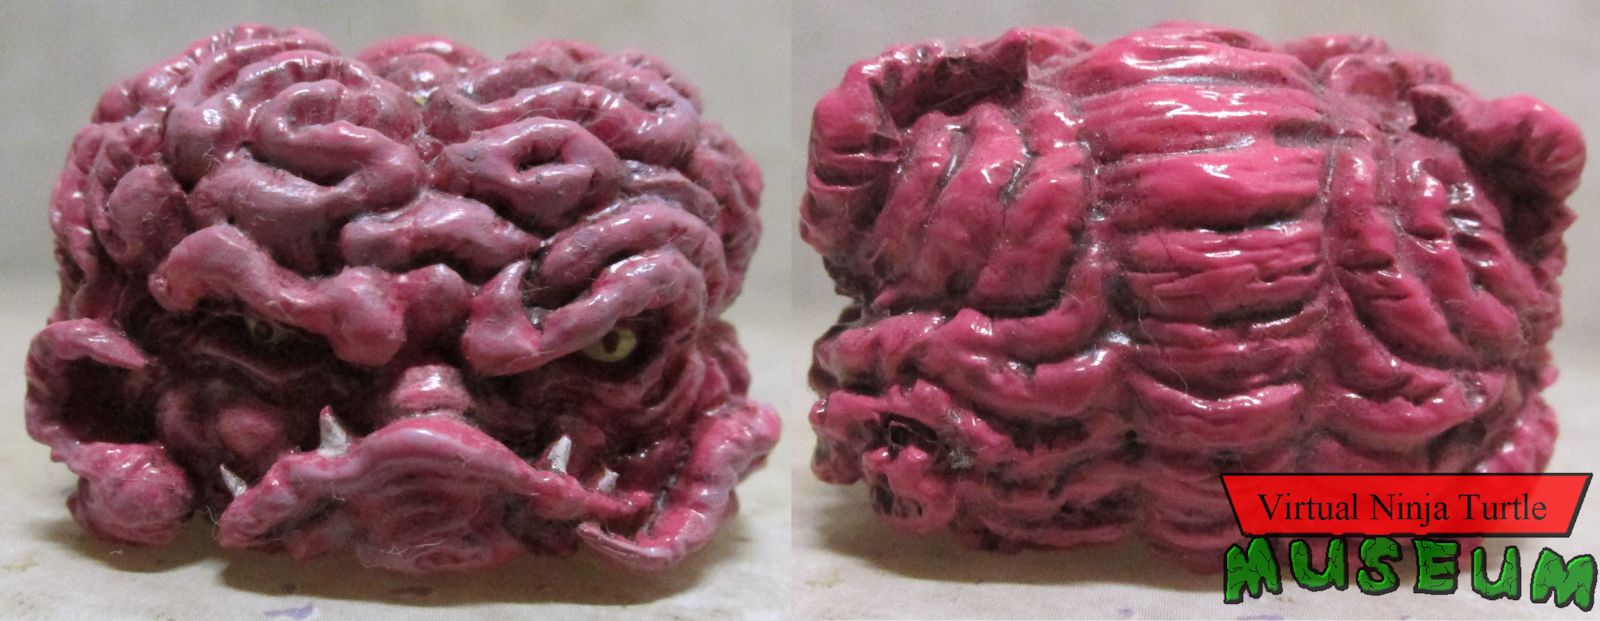 Krang physical body front and back